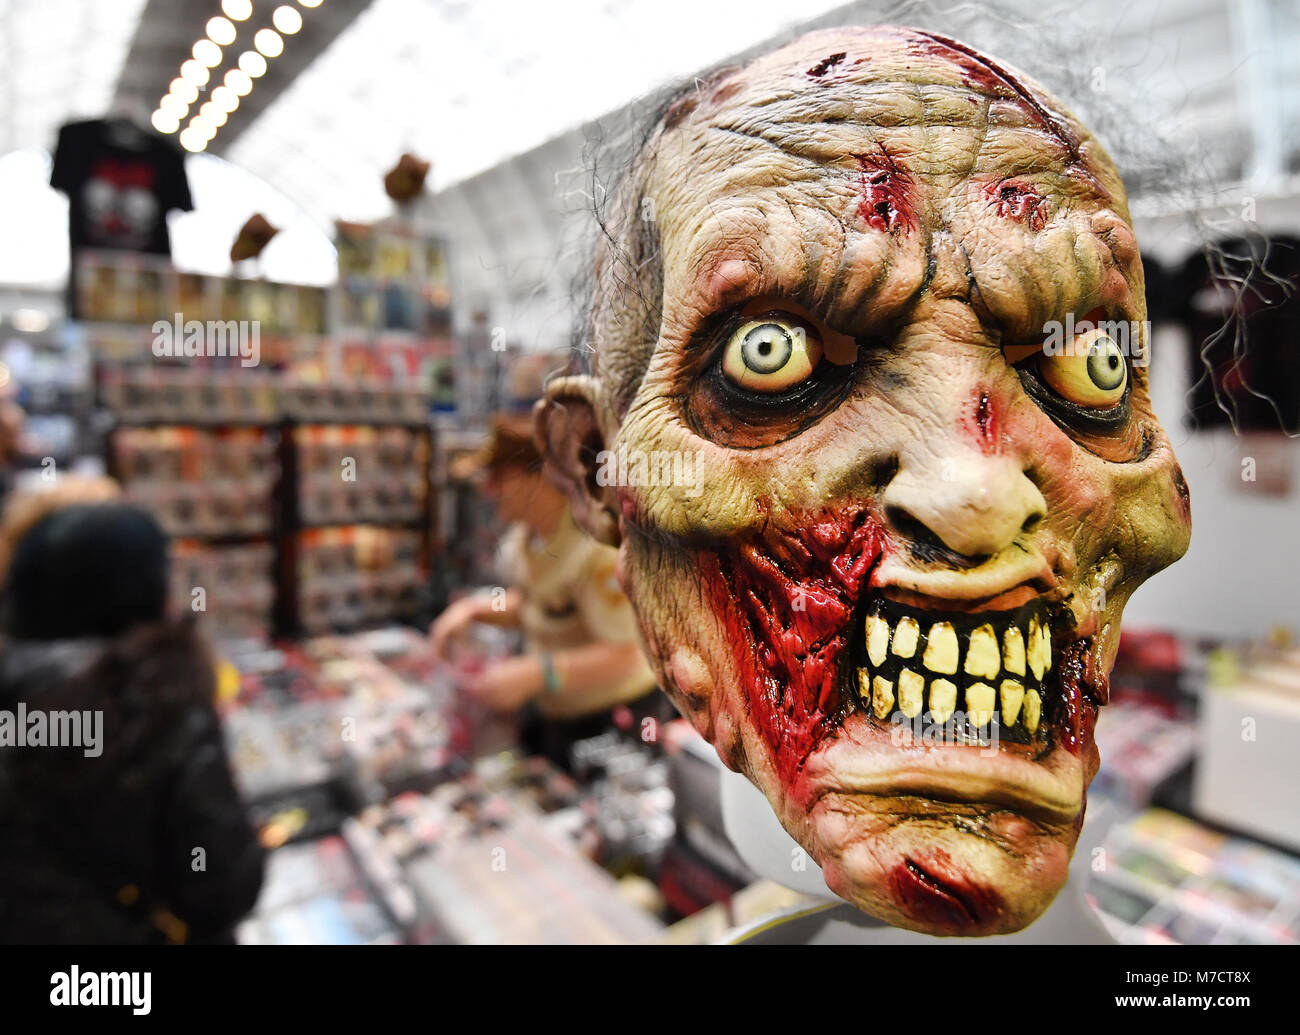 A mask and other merchandise on sale at the Walking Dead convention, The Walker Stalker, at Olympia, London. Stock Photo